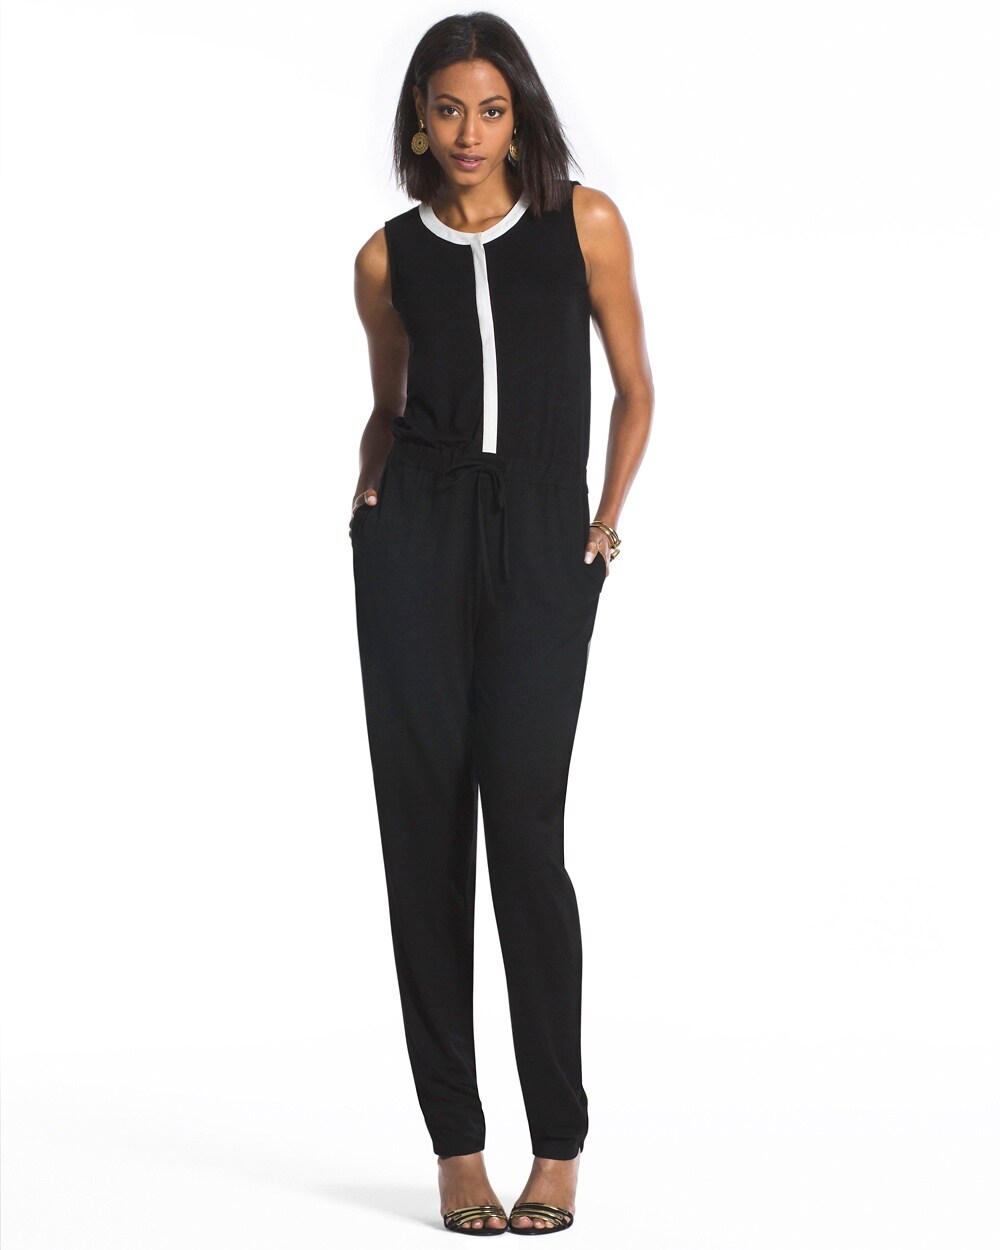 Black-and-White Jumpsuit